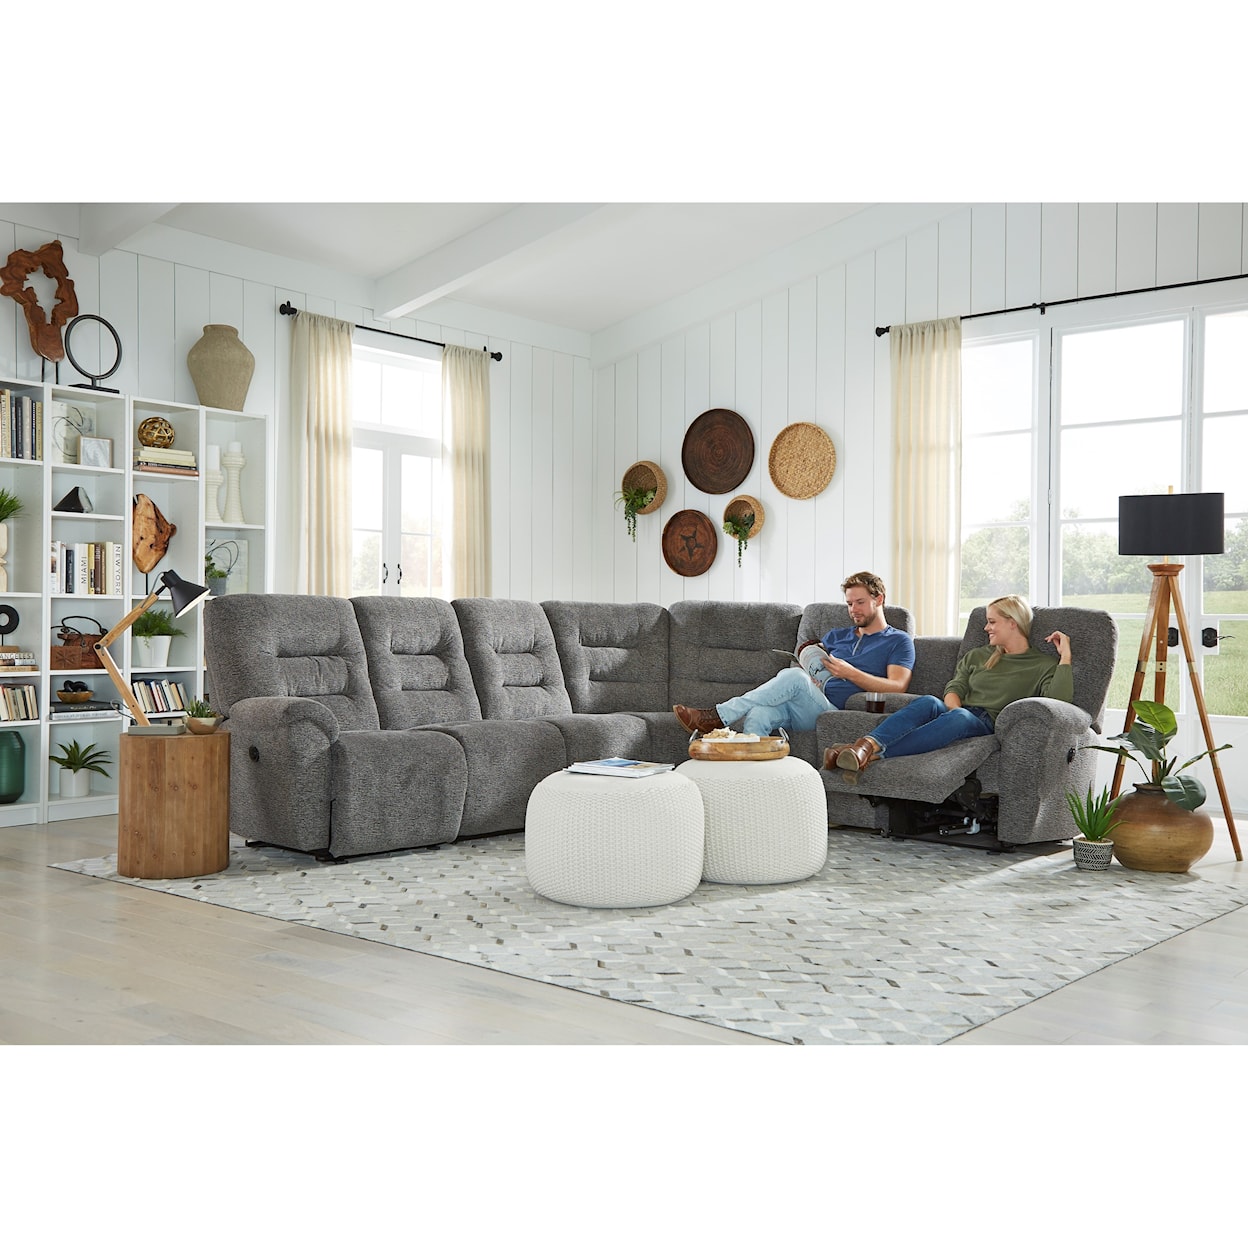 Best Home Furnishings Unity 5-Seat Reclining Sectional Sofa